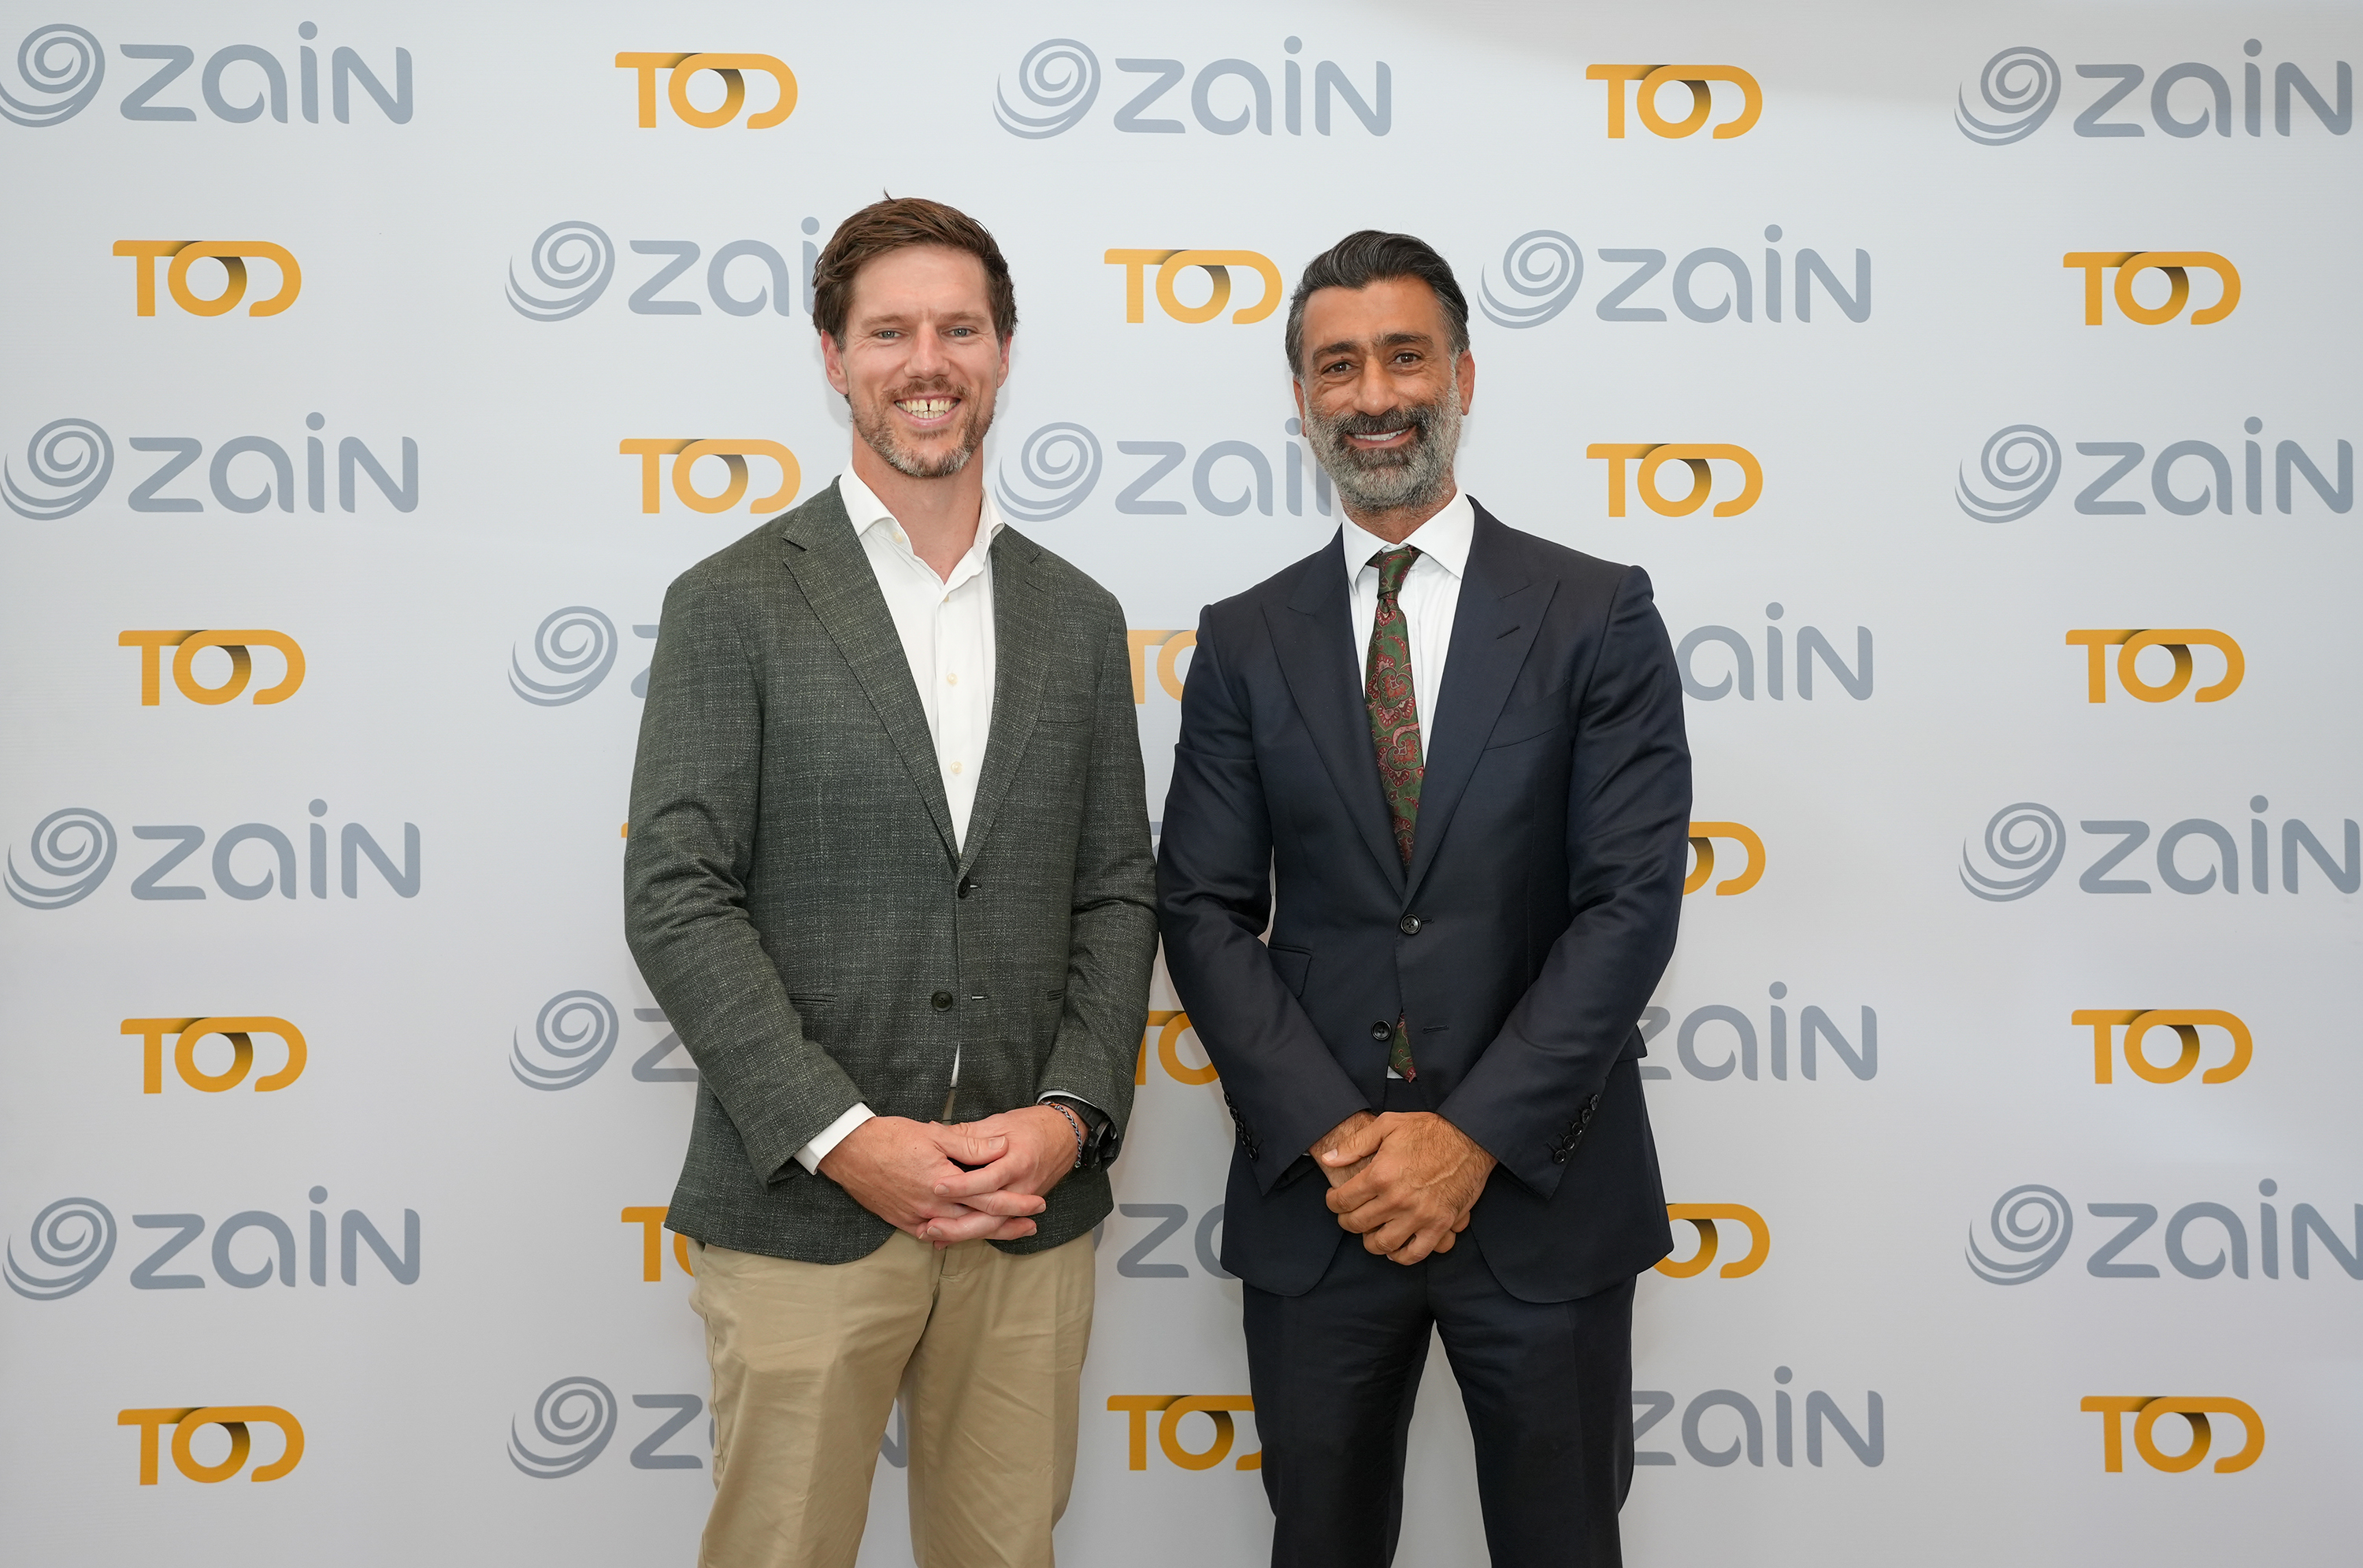 Zain partners TOD to offer latest movies,  TV shows and exclusive sports content